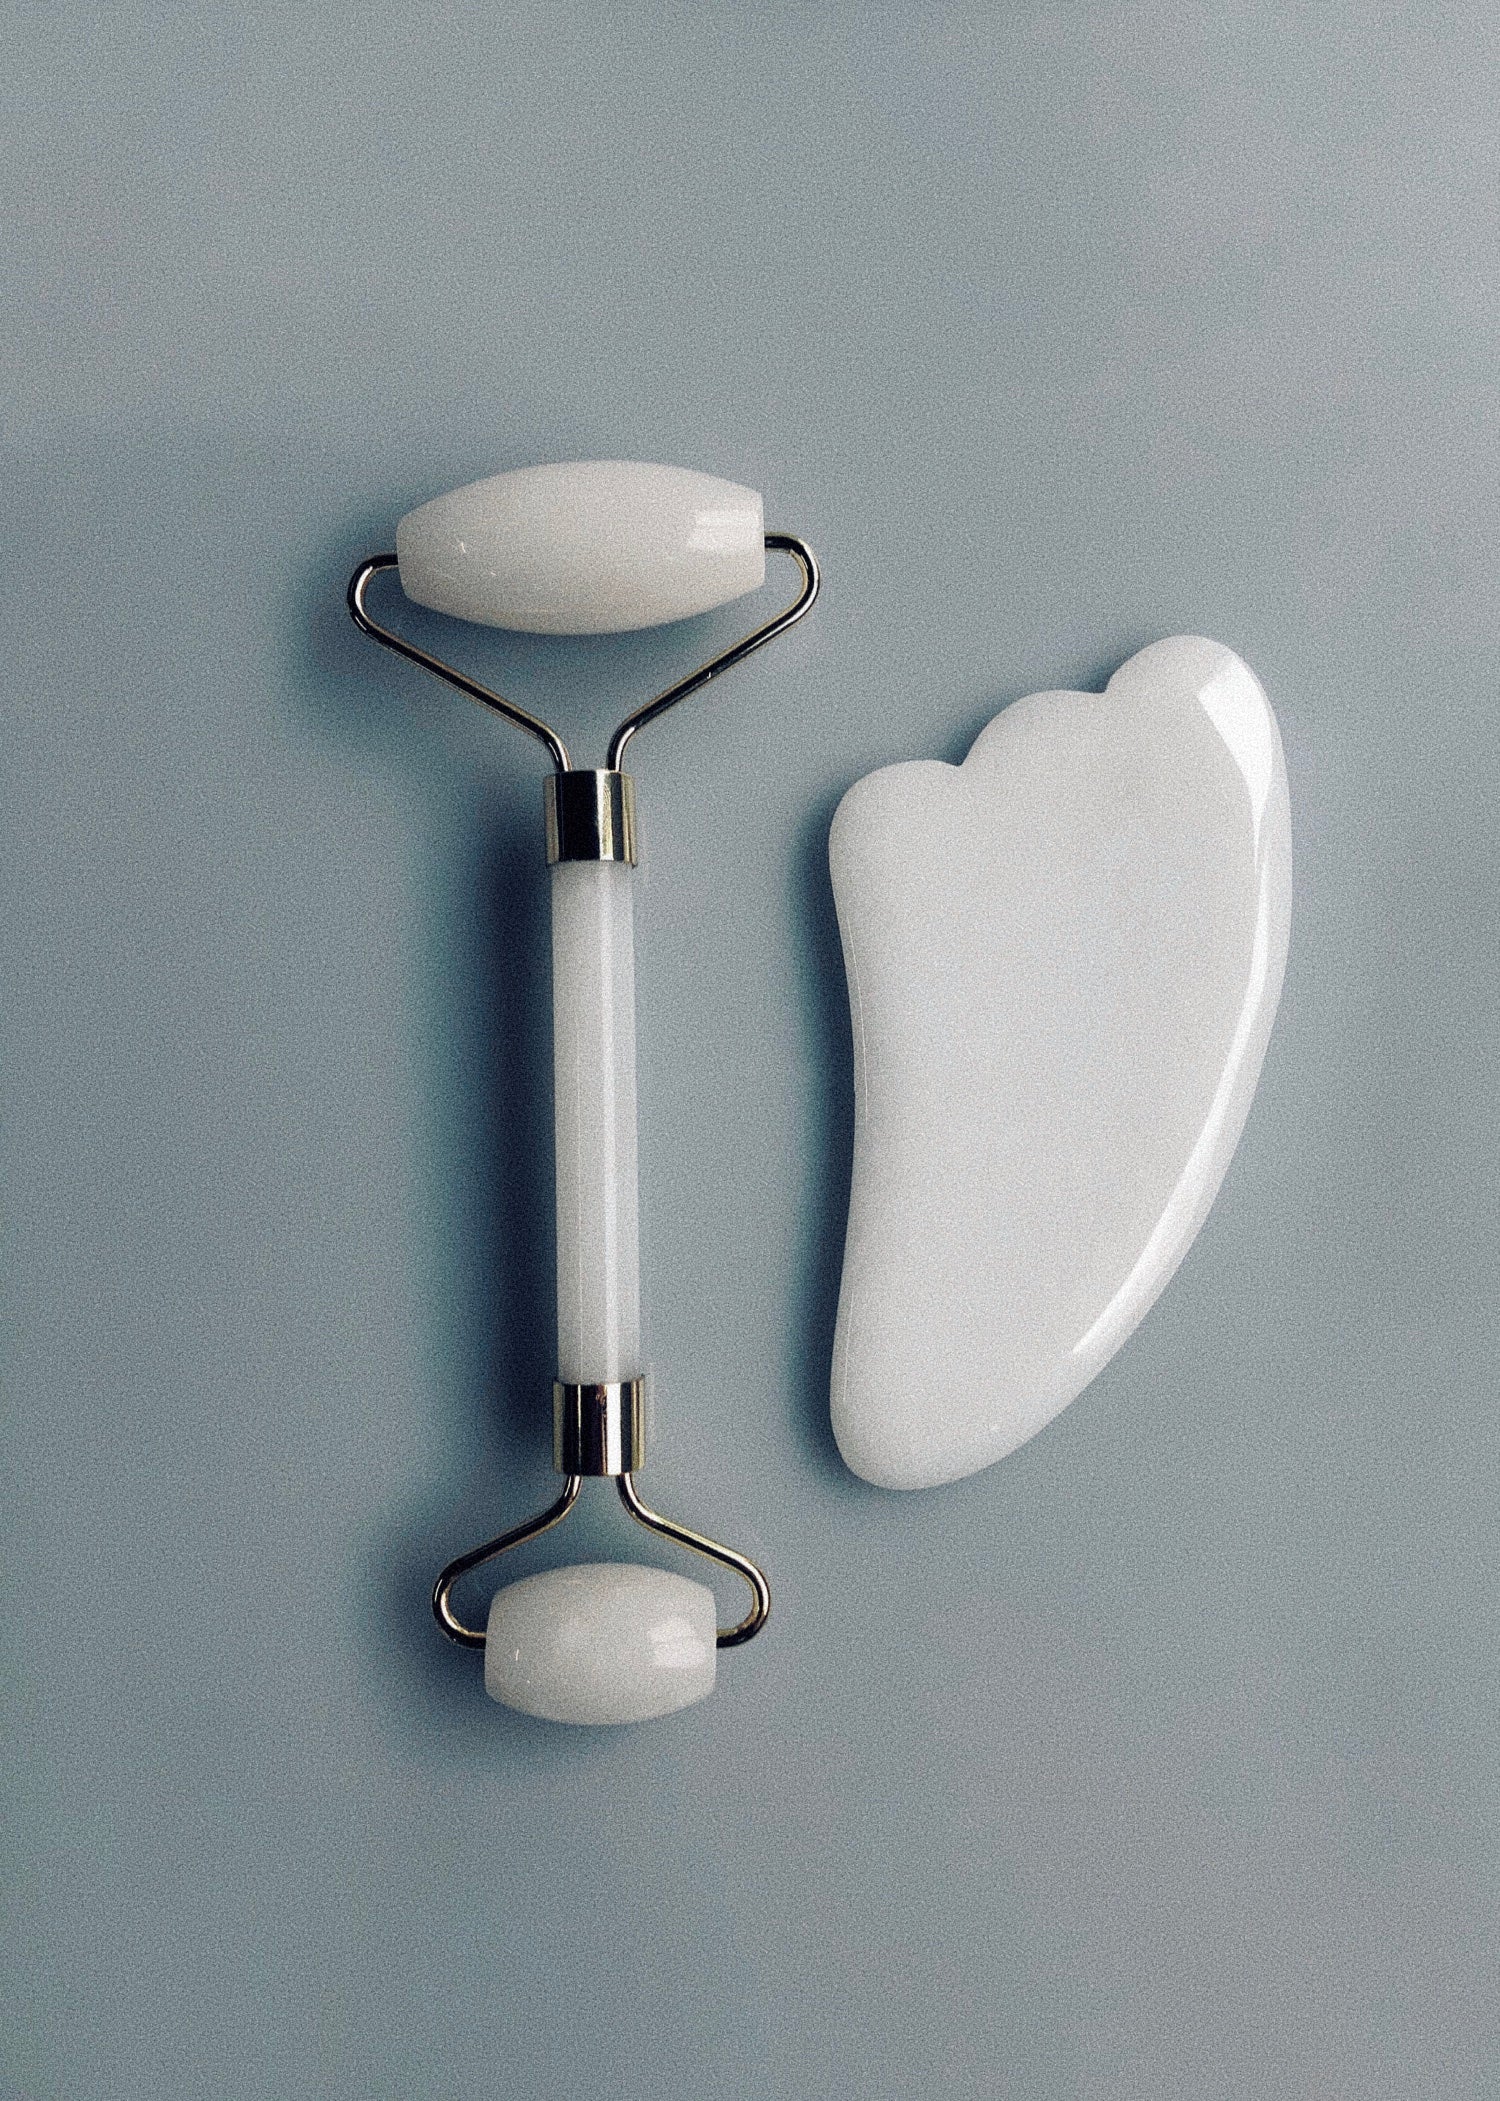 Gua Sha Tool Vs. Jade Roller - What's the Difference?